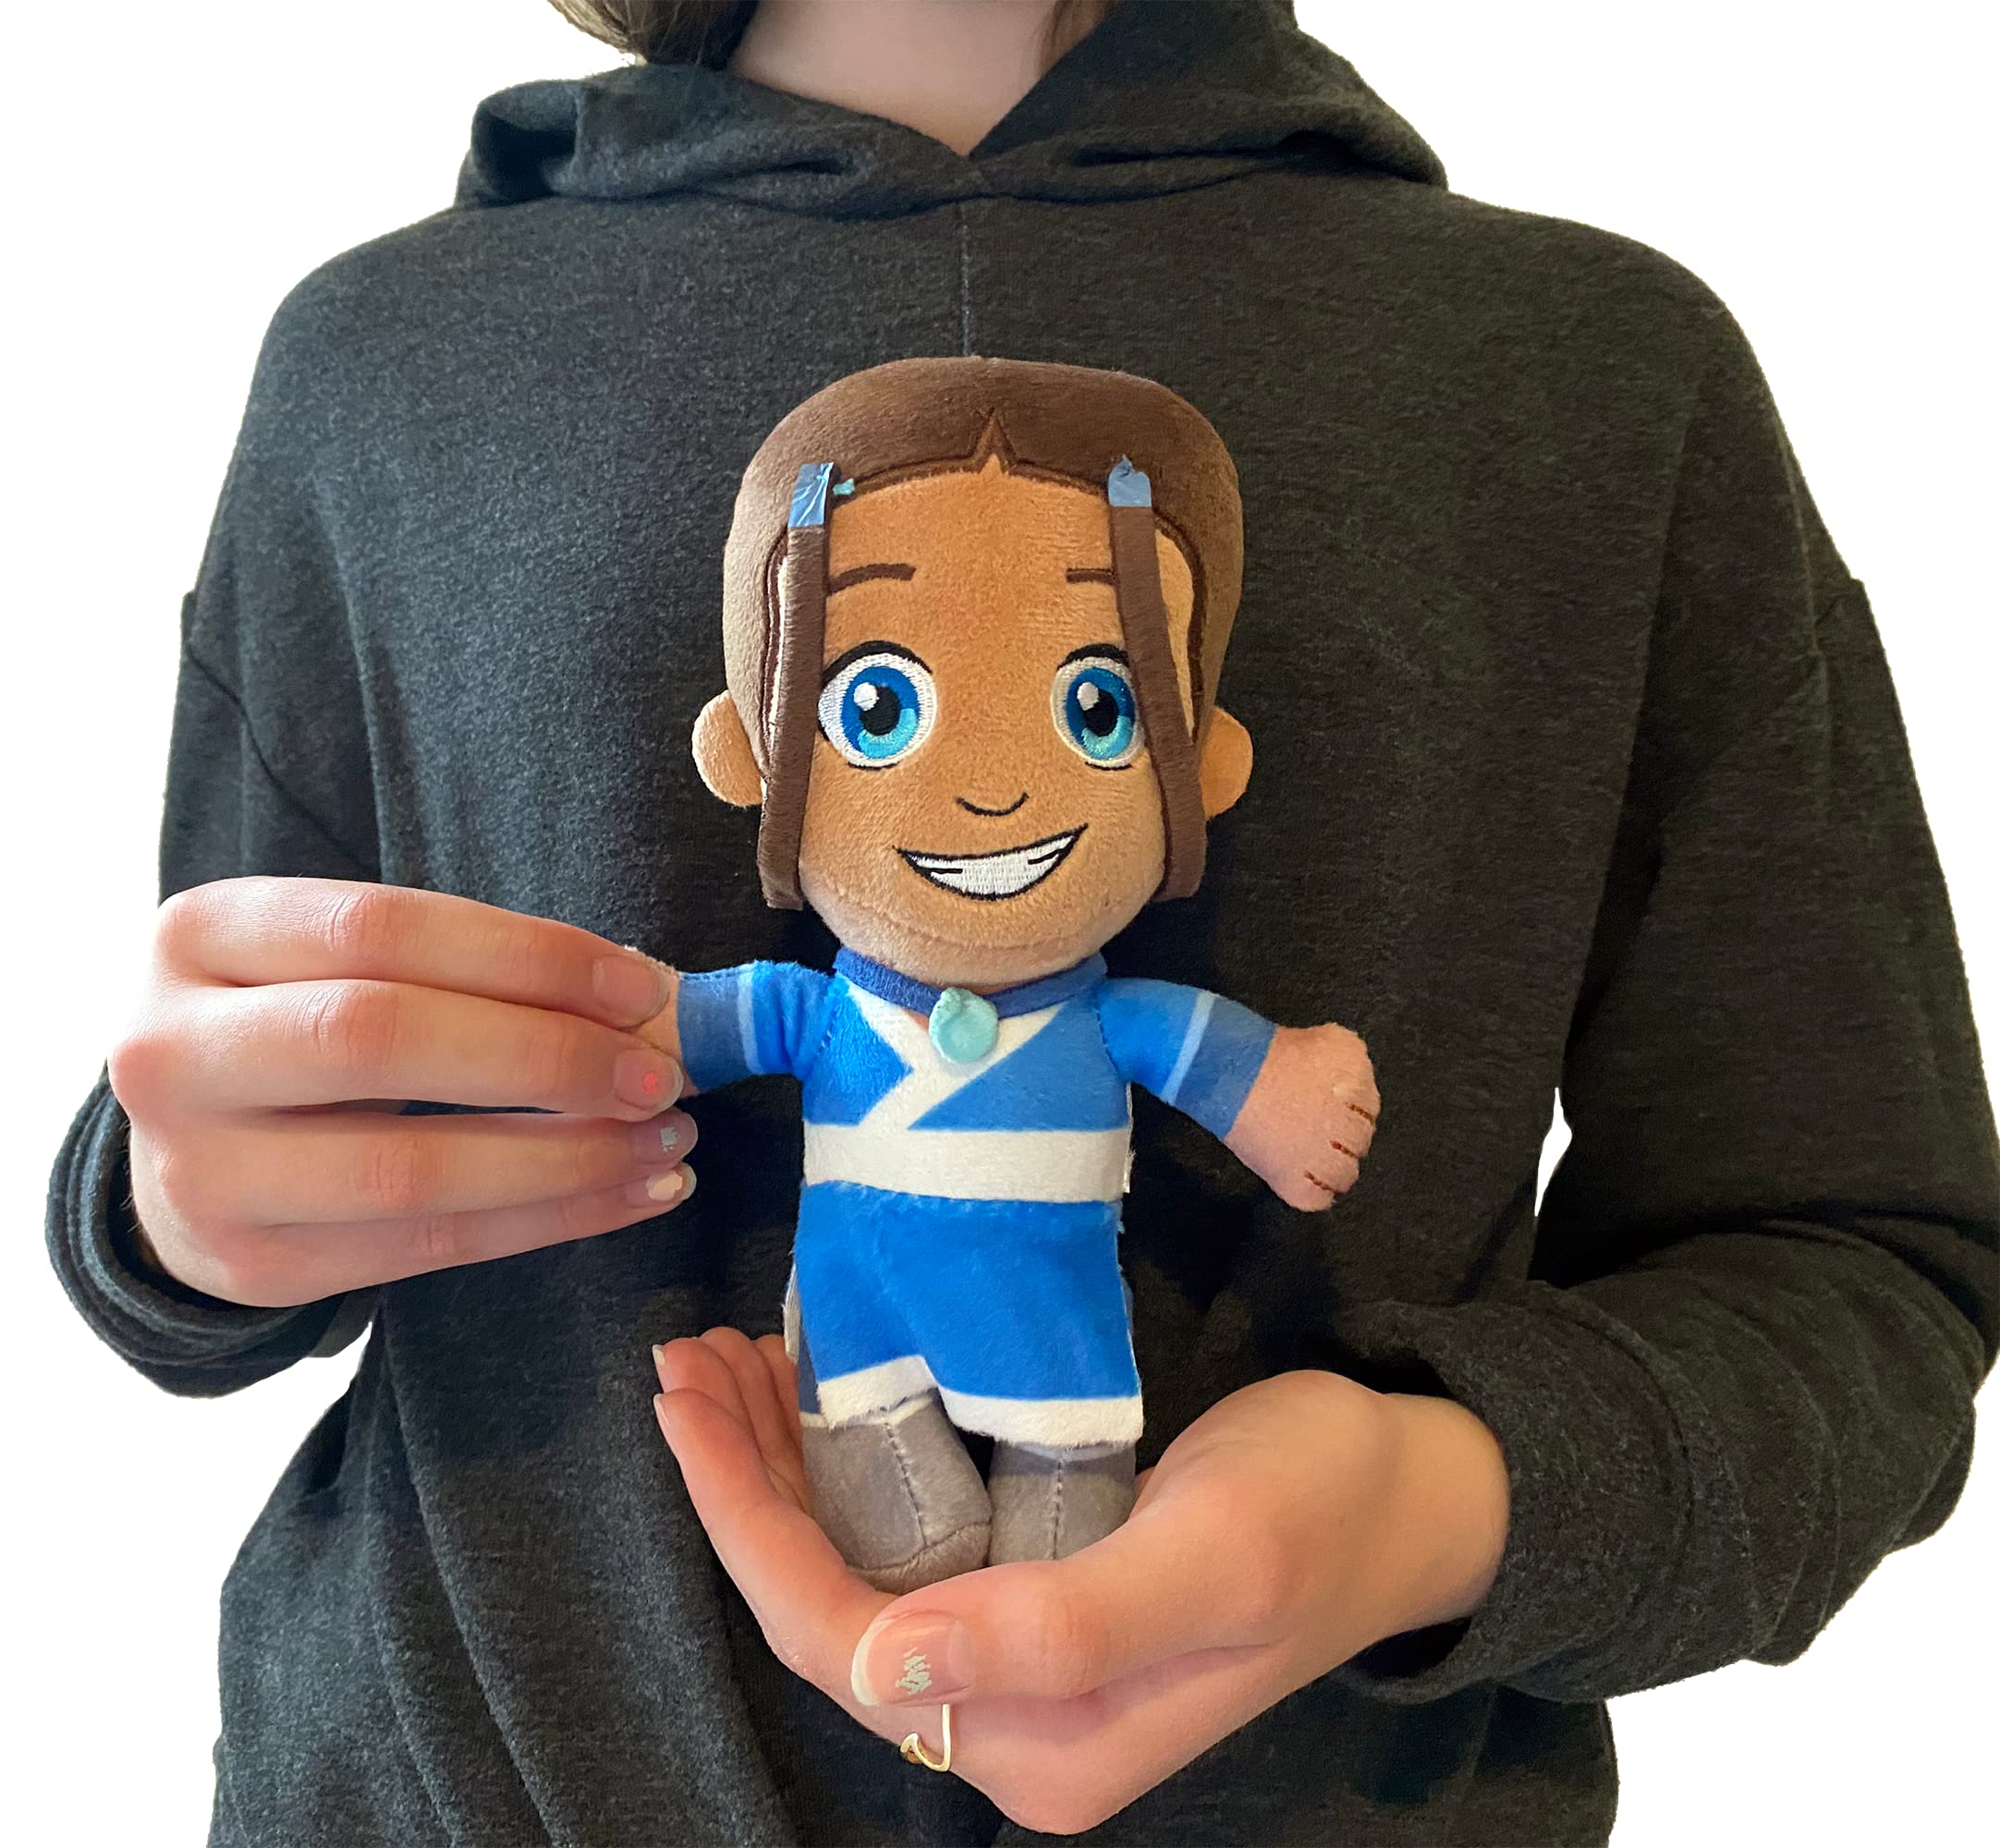 JINX Avatar: The Last Airbender Katara Small Plush Toy, 7.5-in Stuffed Figure from Nickelodeon TV Series for Fans of All Ages